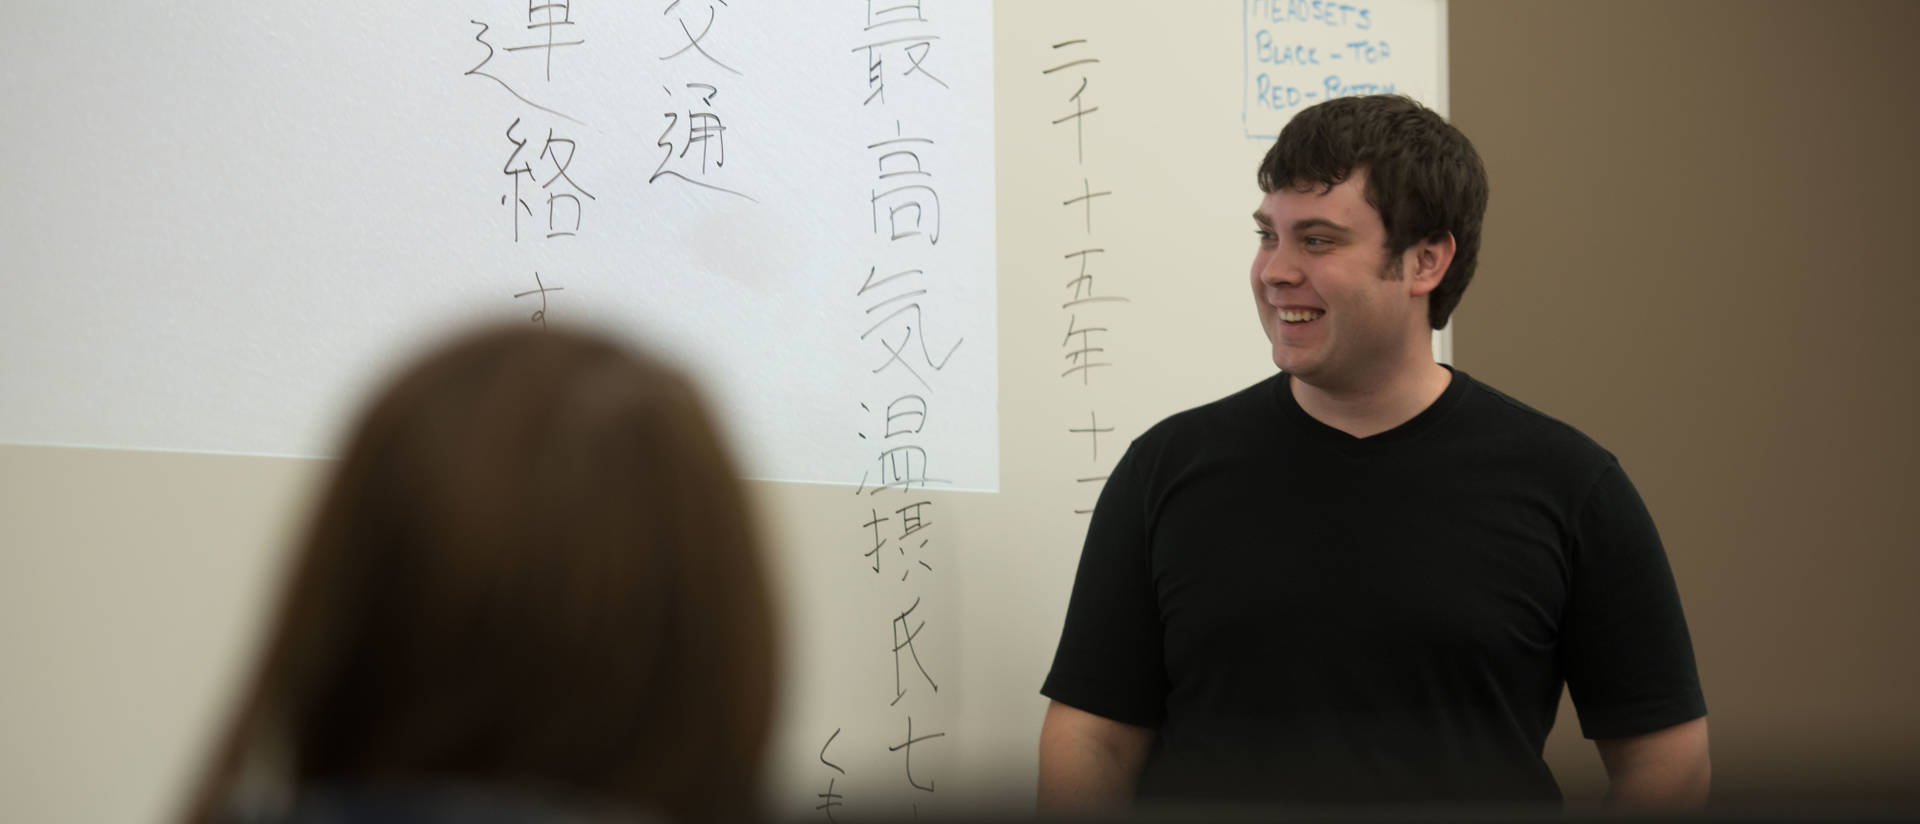 Students in a Japanese language class writing on white board